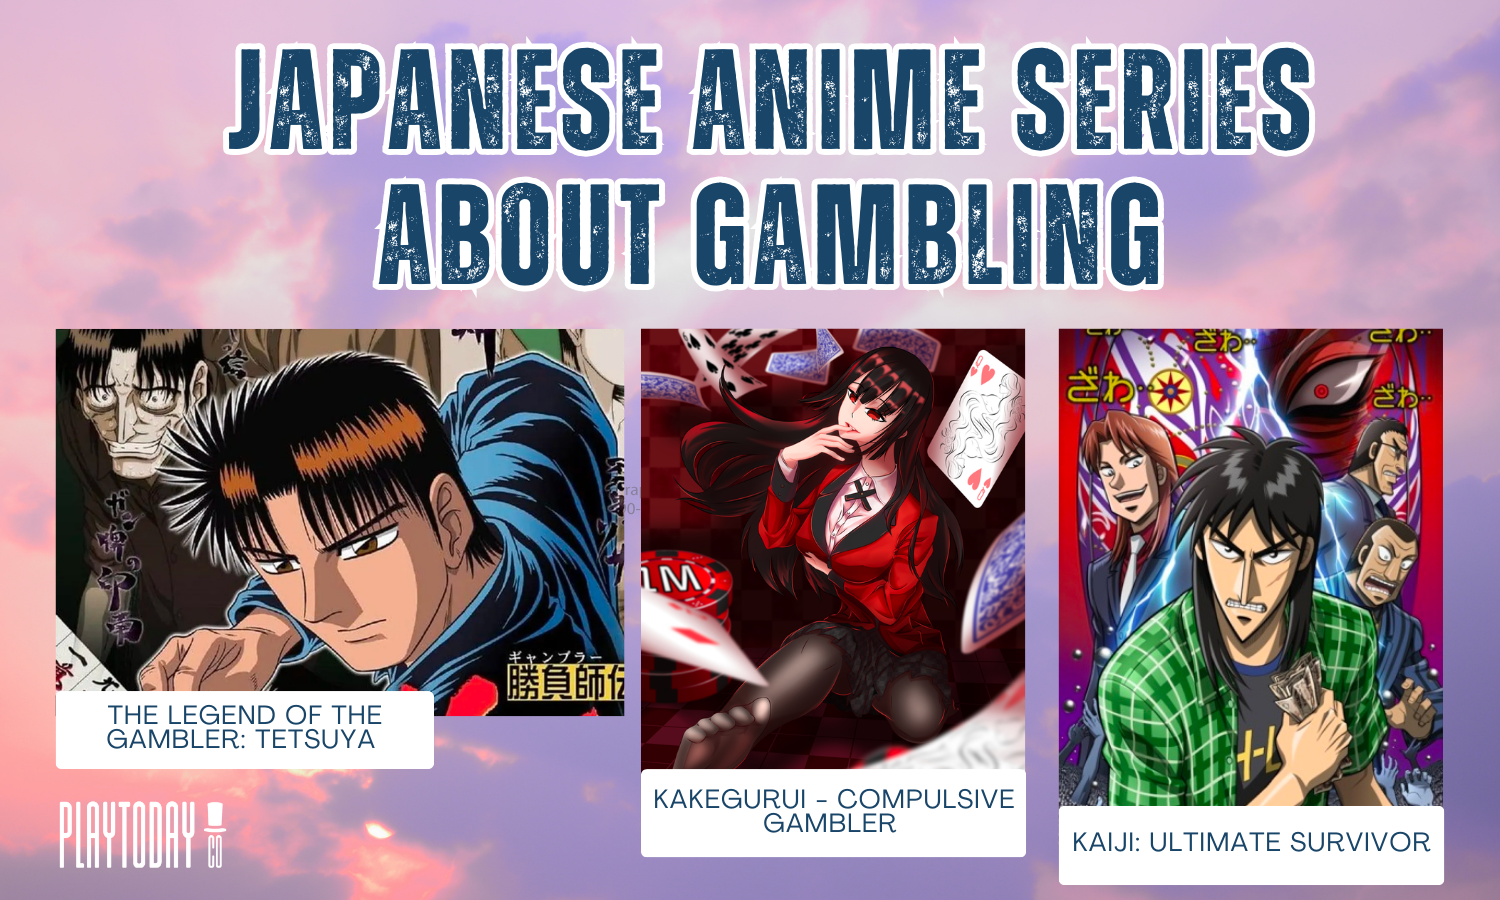 Examples of Japanese Anime Series About Gambling